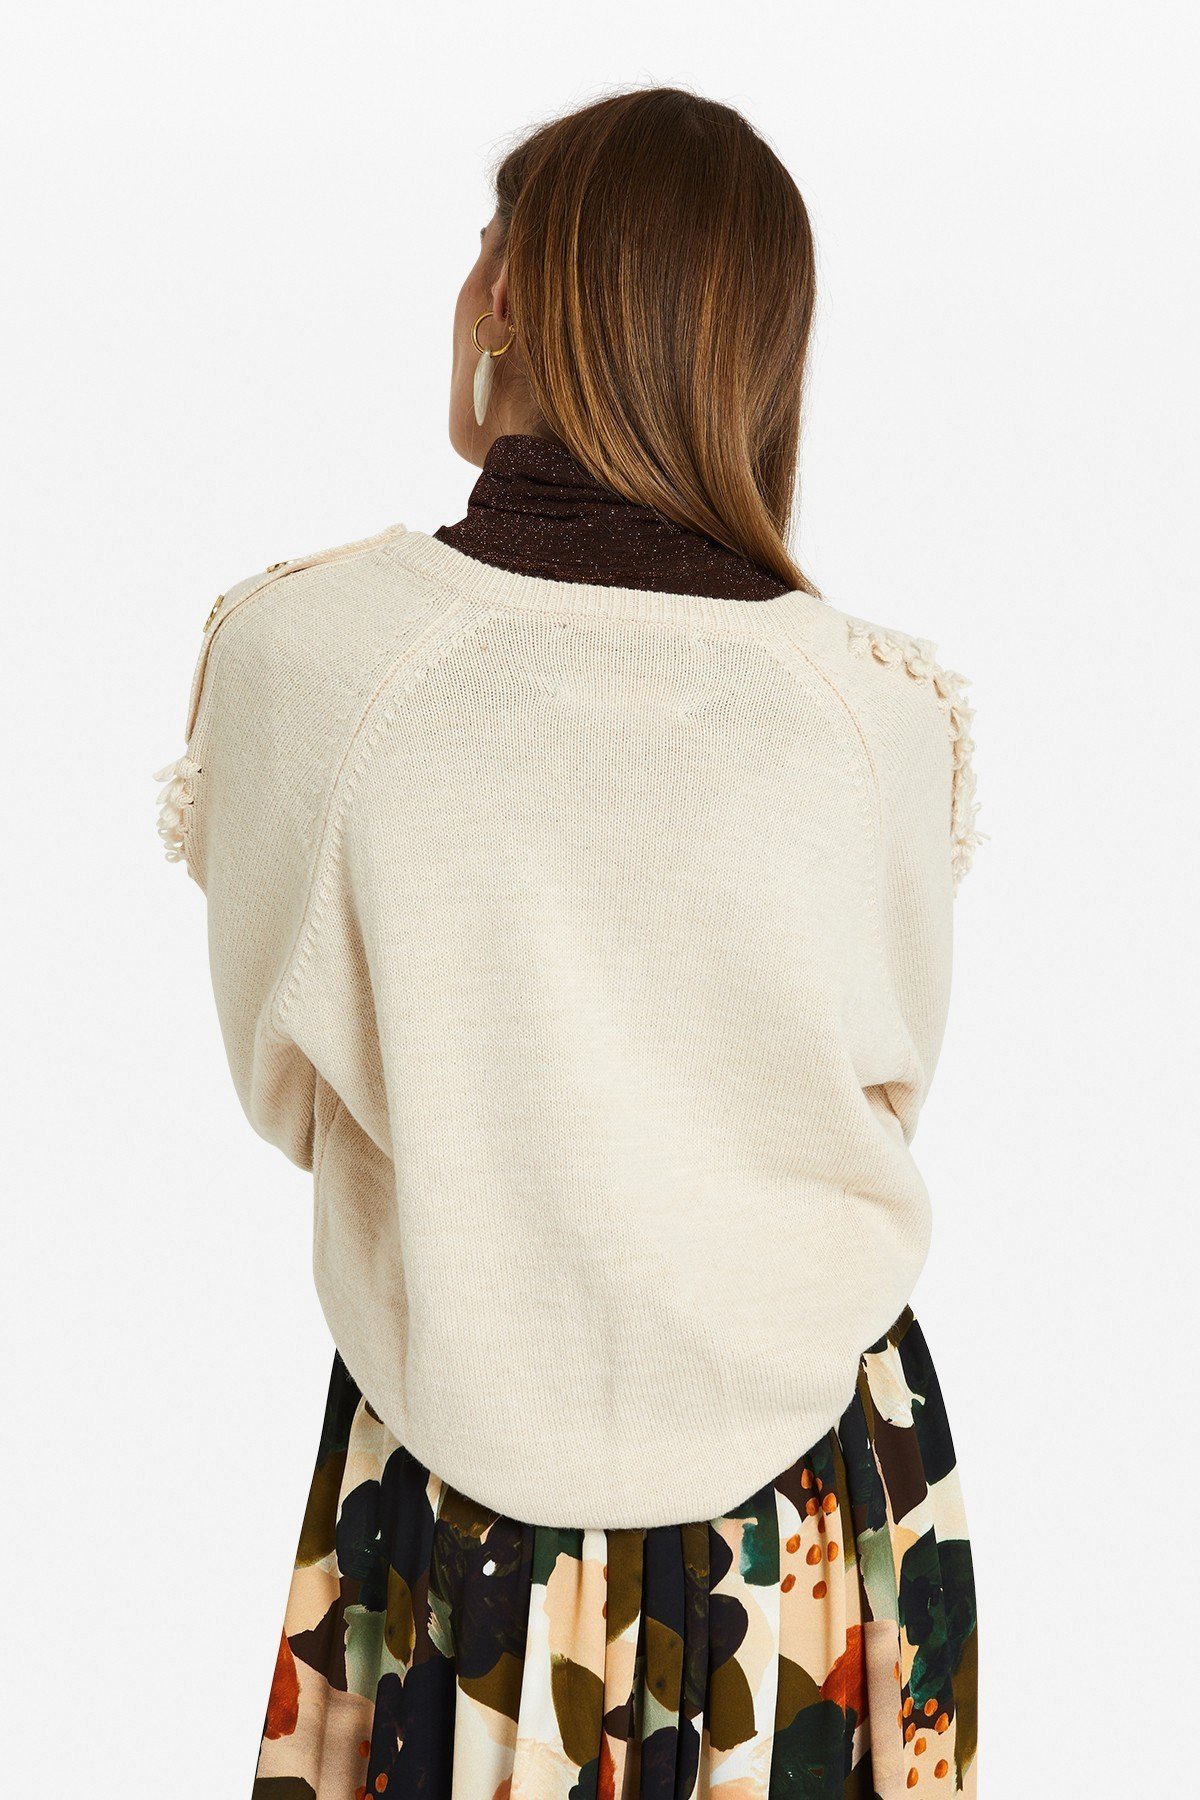 V-neck pullover with appliques on the sleeves